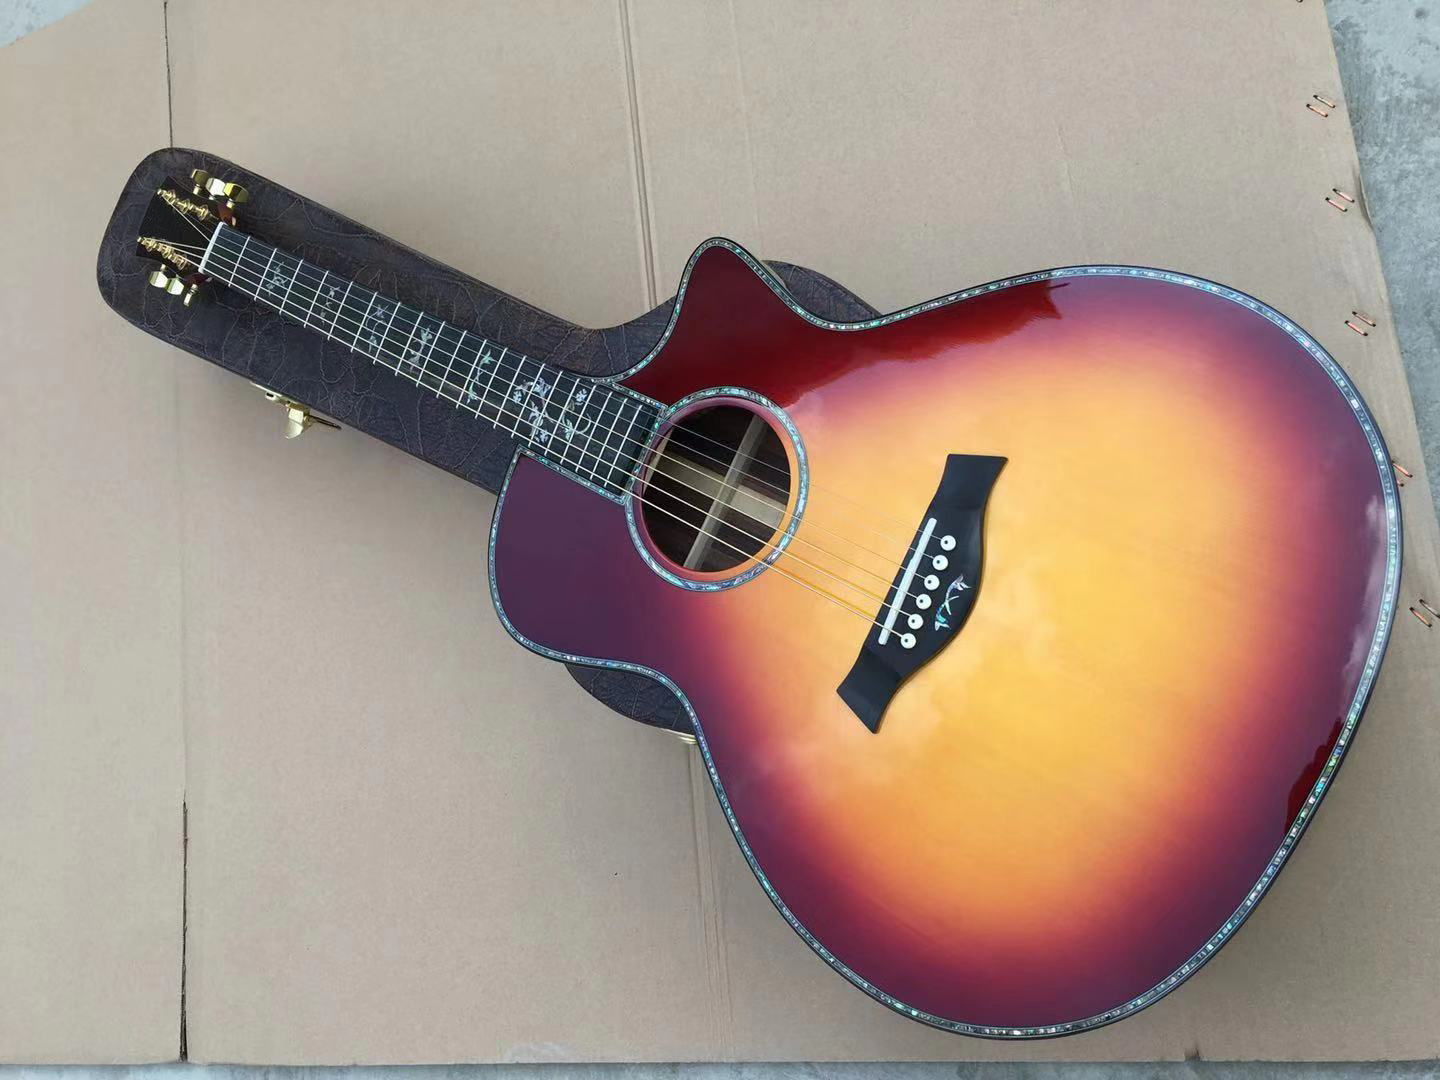 

2022 New 40-inch rounded acoustic acoustic guitar, spruce red pine top, ebony side and back. Ebony fretboard Abalone shell inlay binding